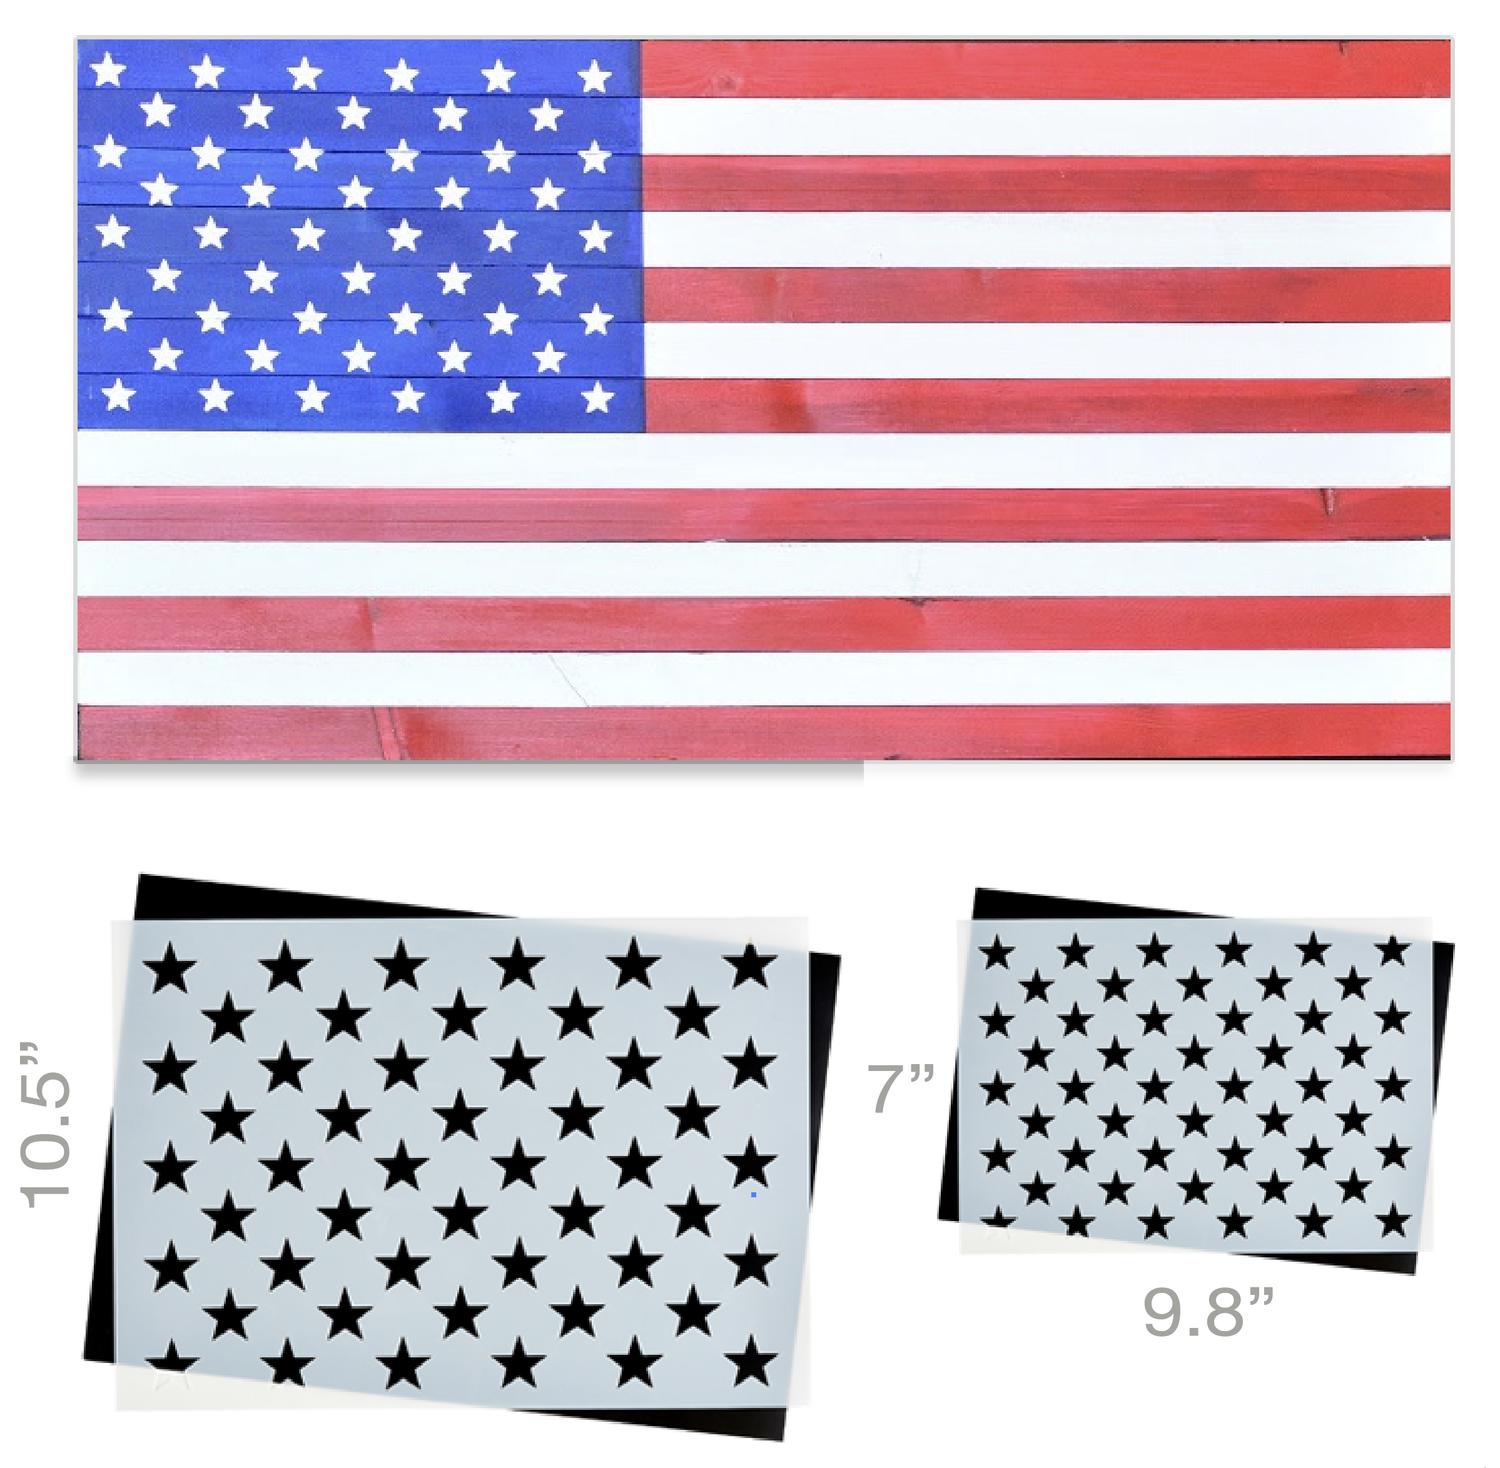 50 Star Stencil (2PK) Ideal for creating American Wood Flags